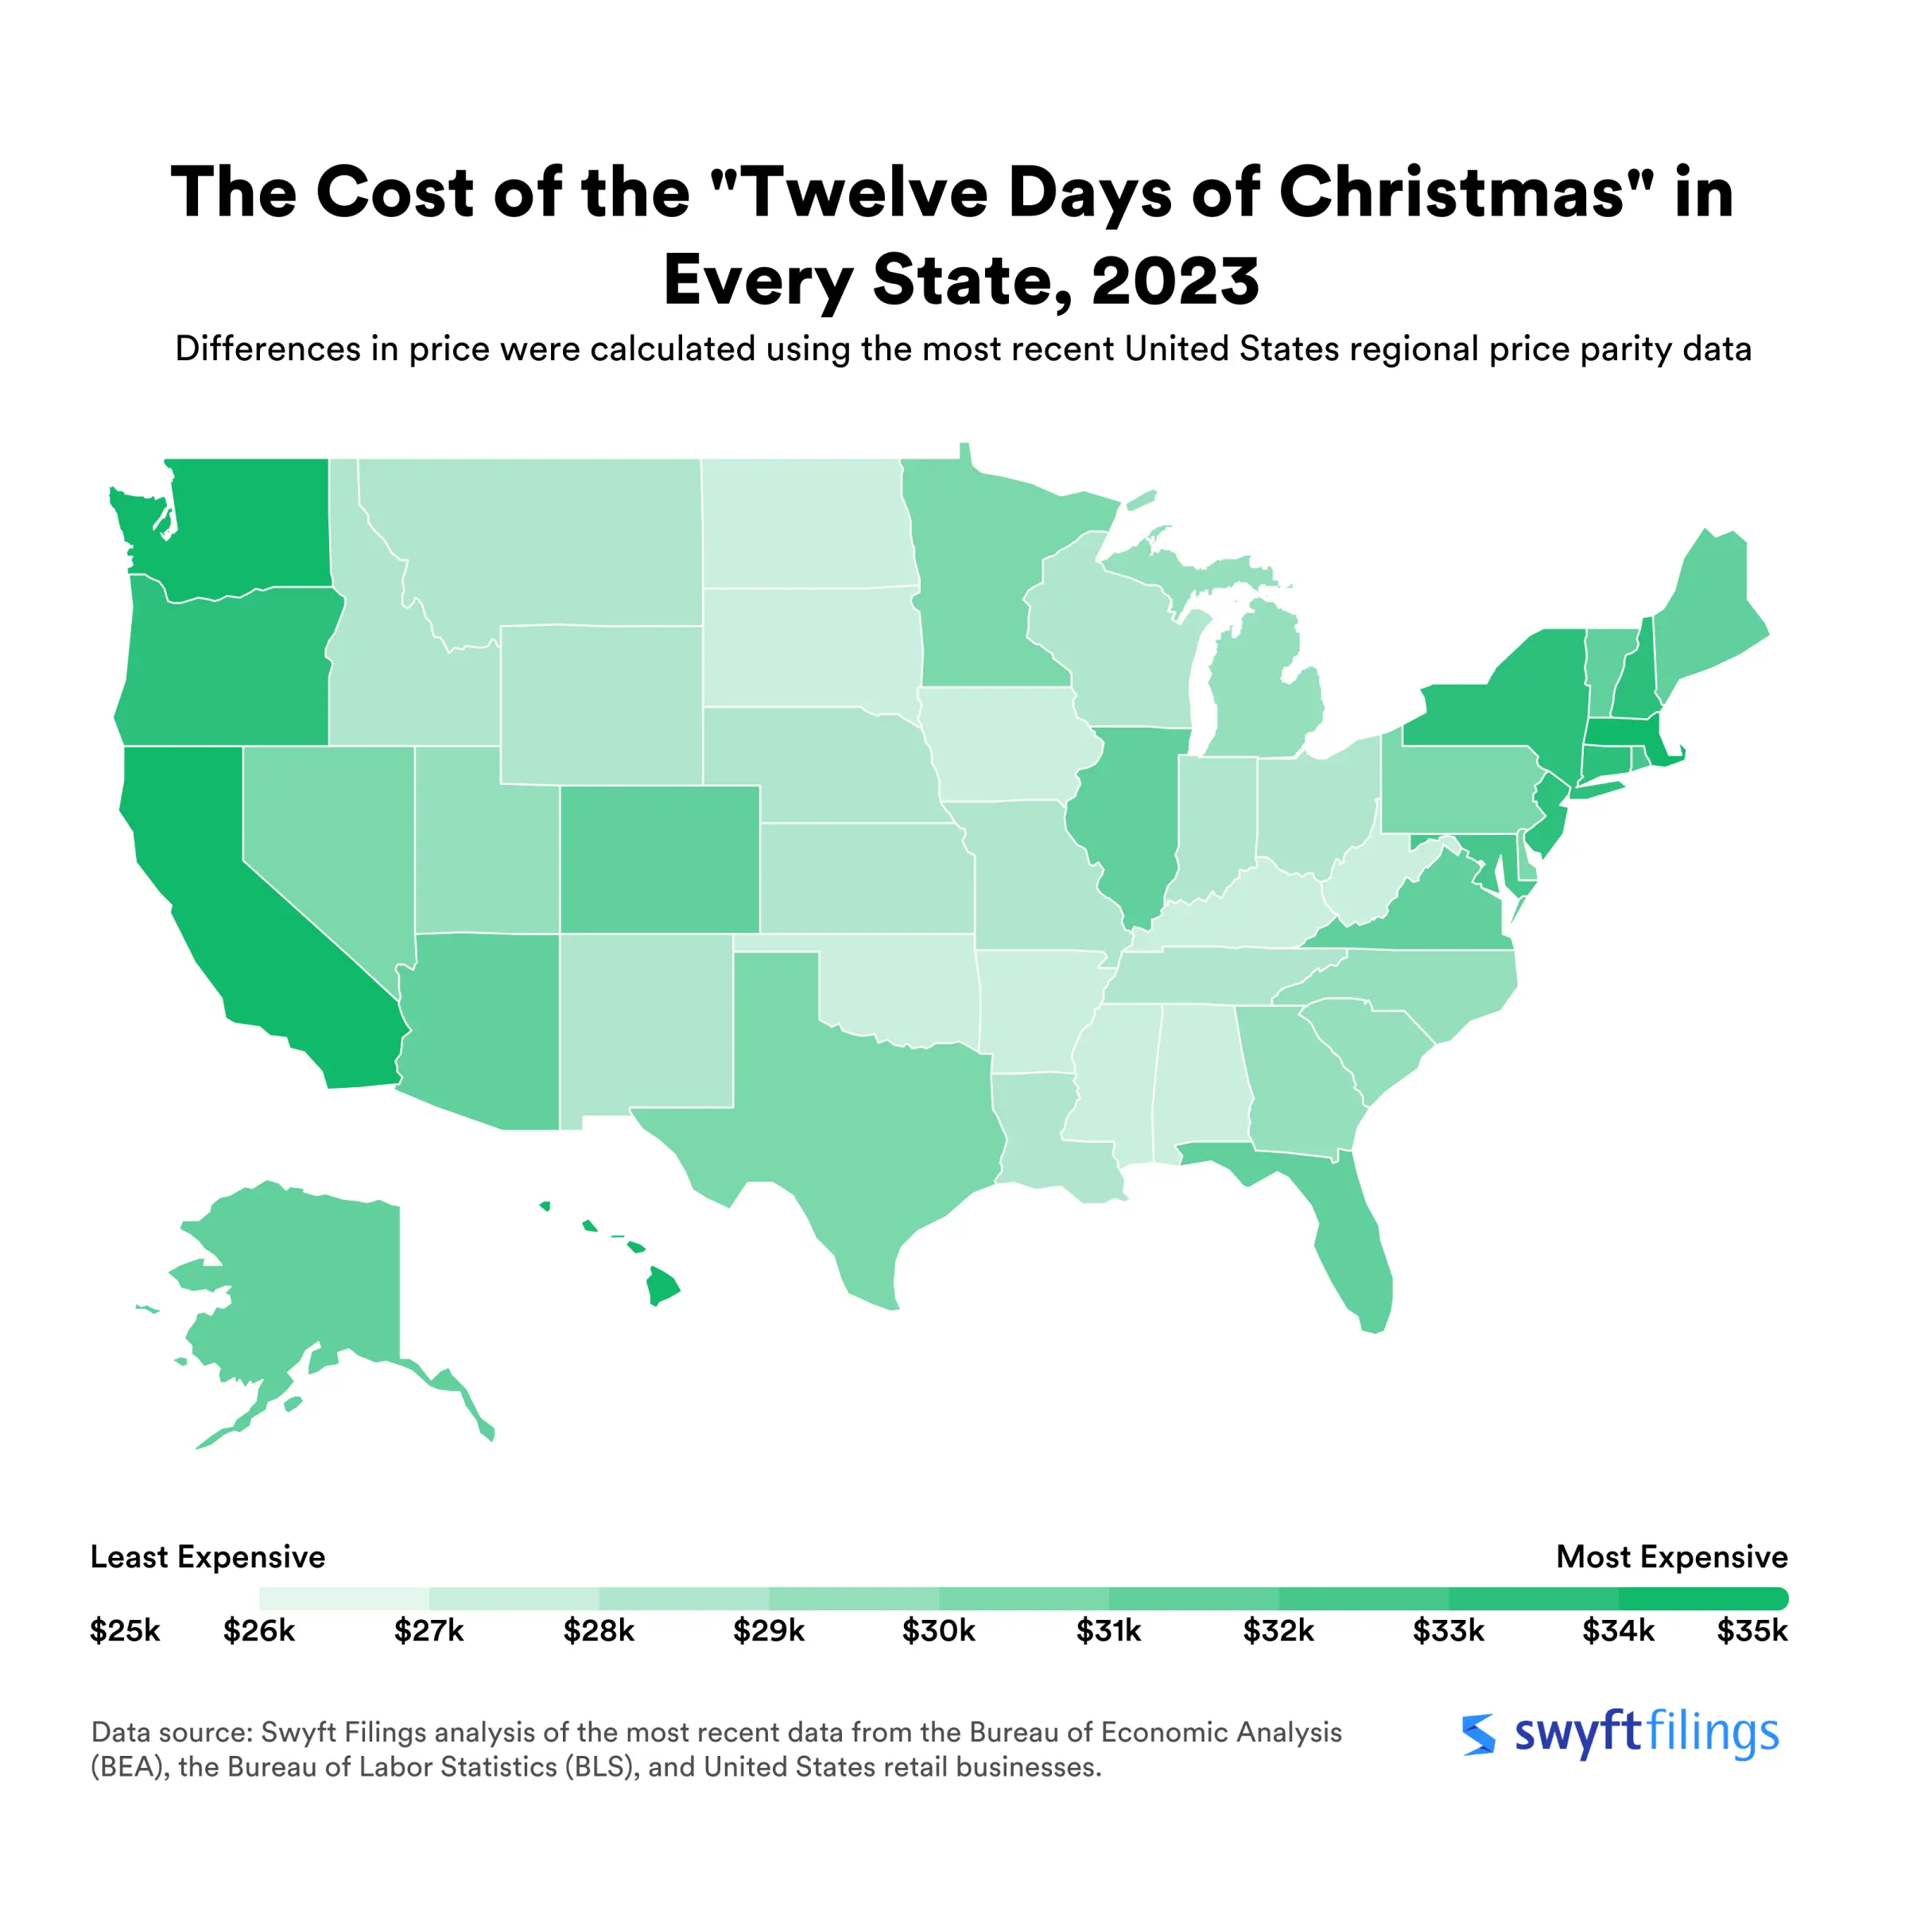 heat map of the united states showing regional differences in the cost of the gifts listed in "The 12 Days of Christmas"